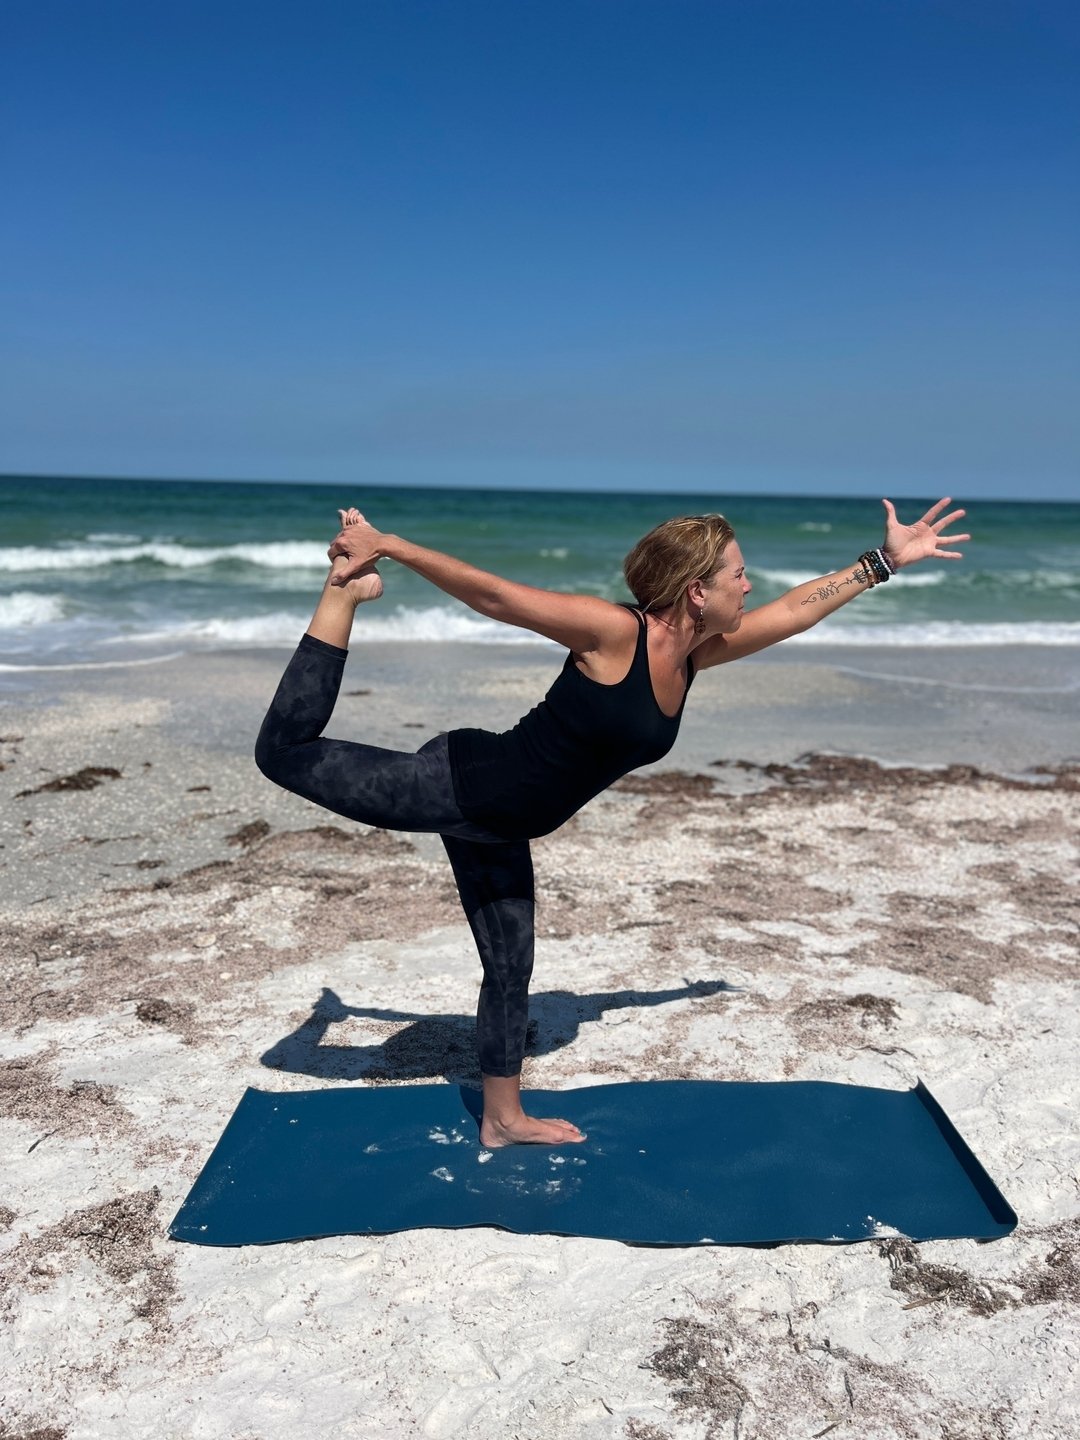 Meet Julie! ☀️

Julie's enthusiasm for this practice radiates off of her! She has learned that as long as she shows up on her mat consistently, anything is possible!! Julie brings this lesson she's learned from her own practice to her students. Her f